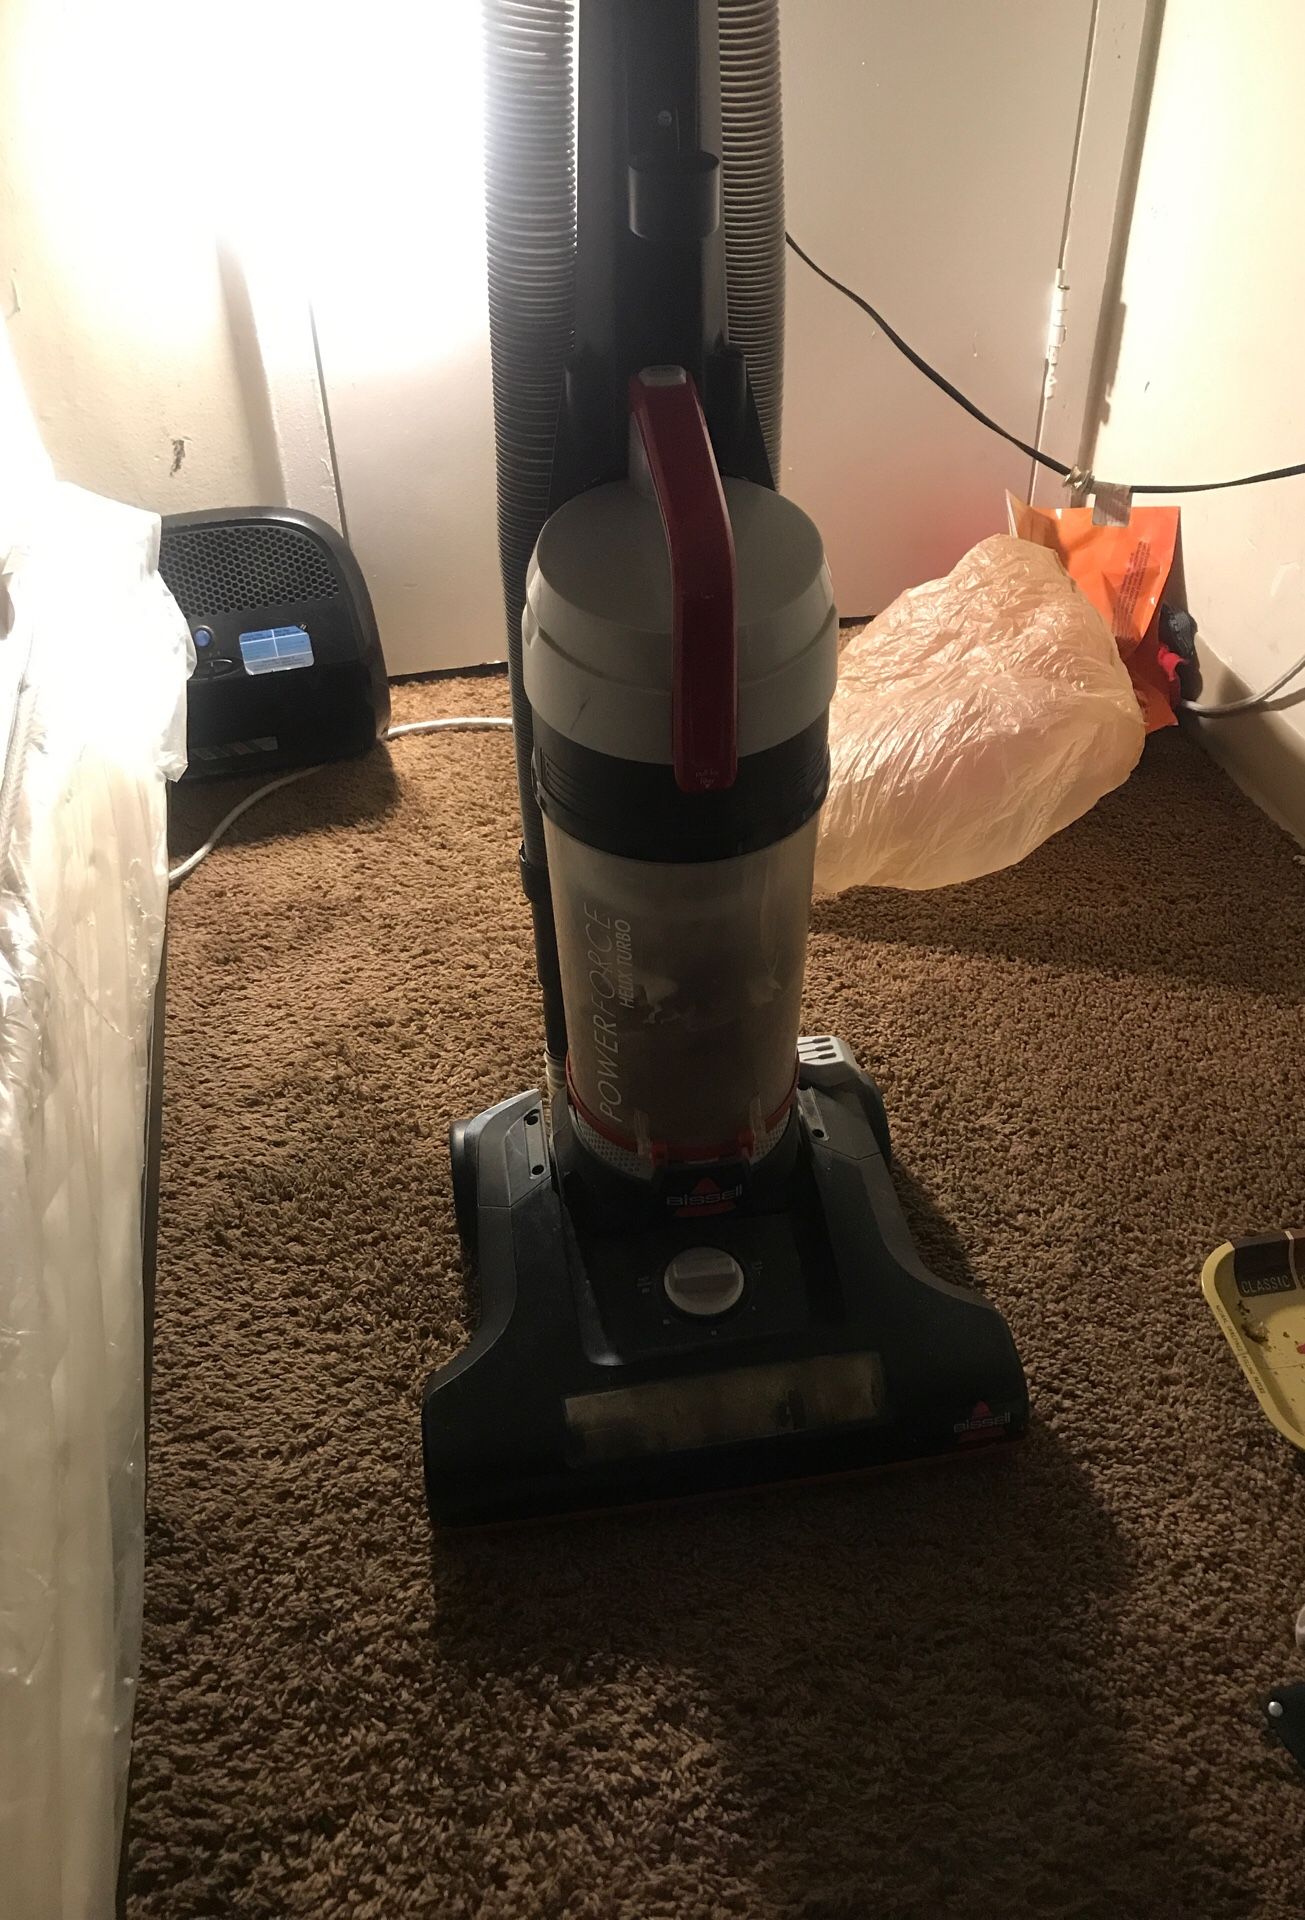 Power Force Helix Turbo Vacuum cleaner